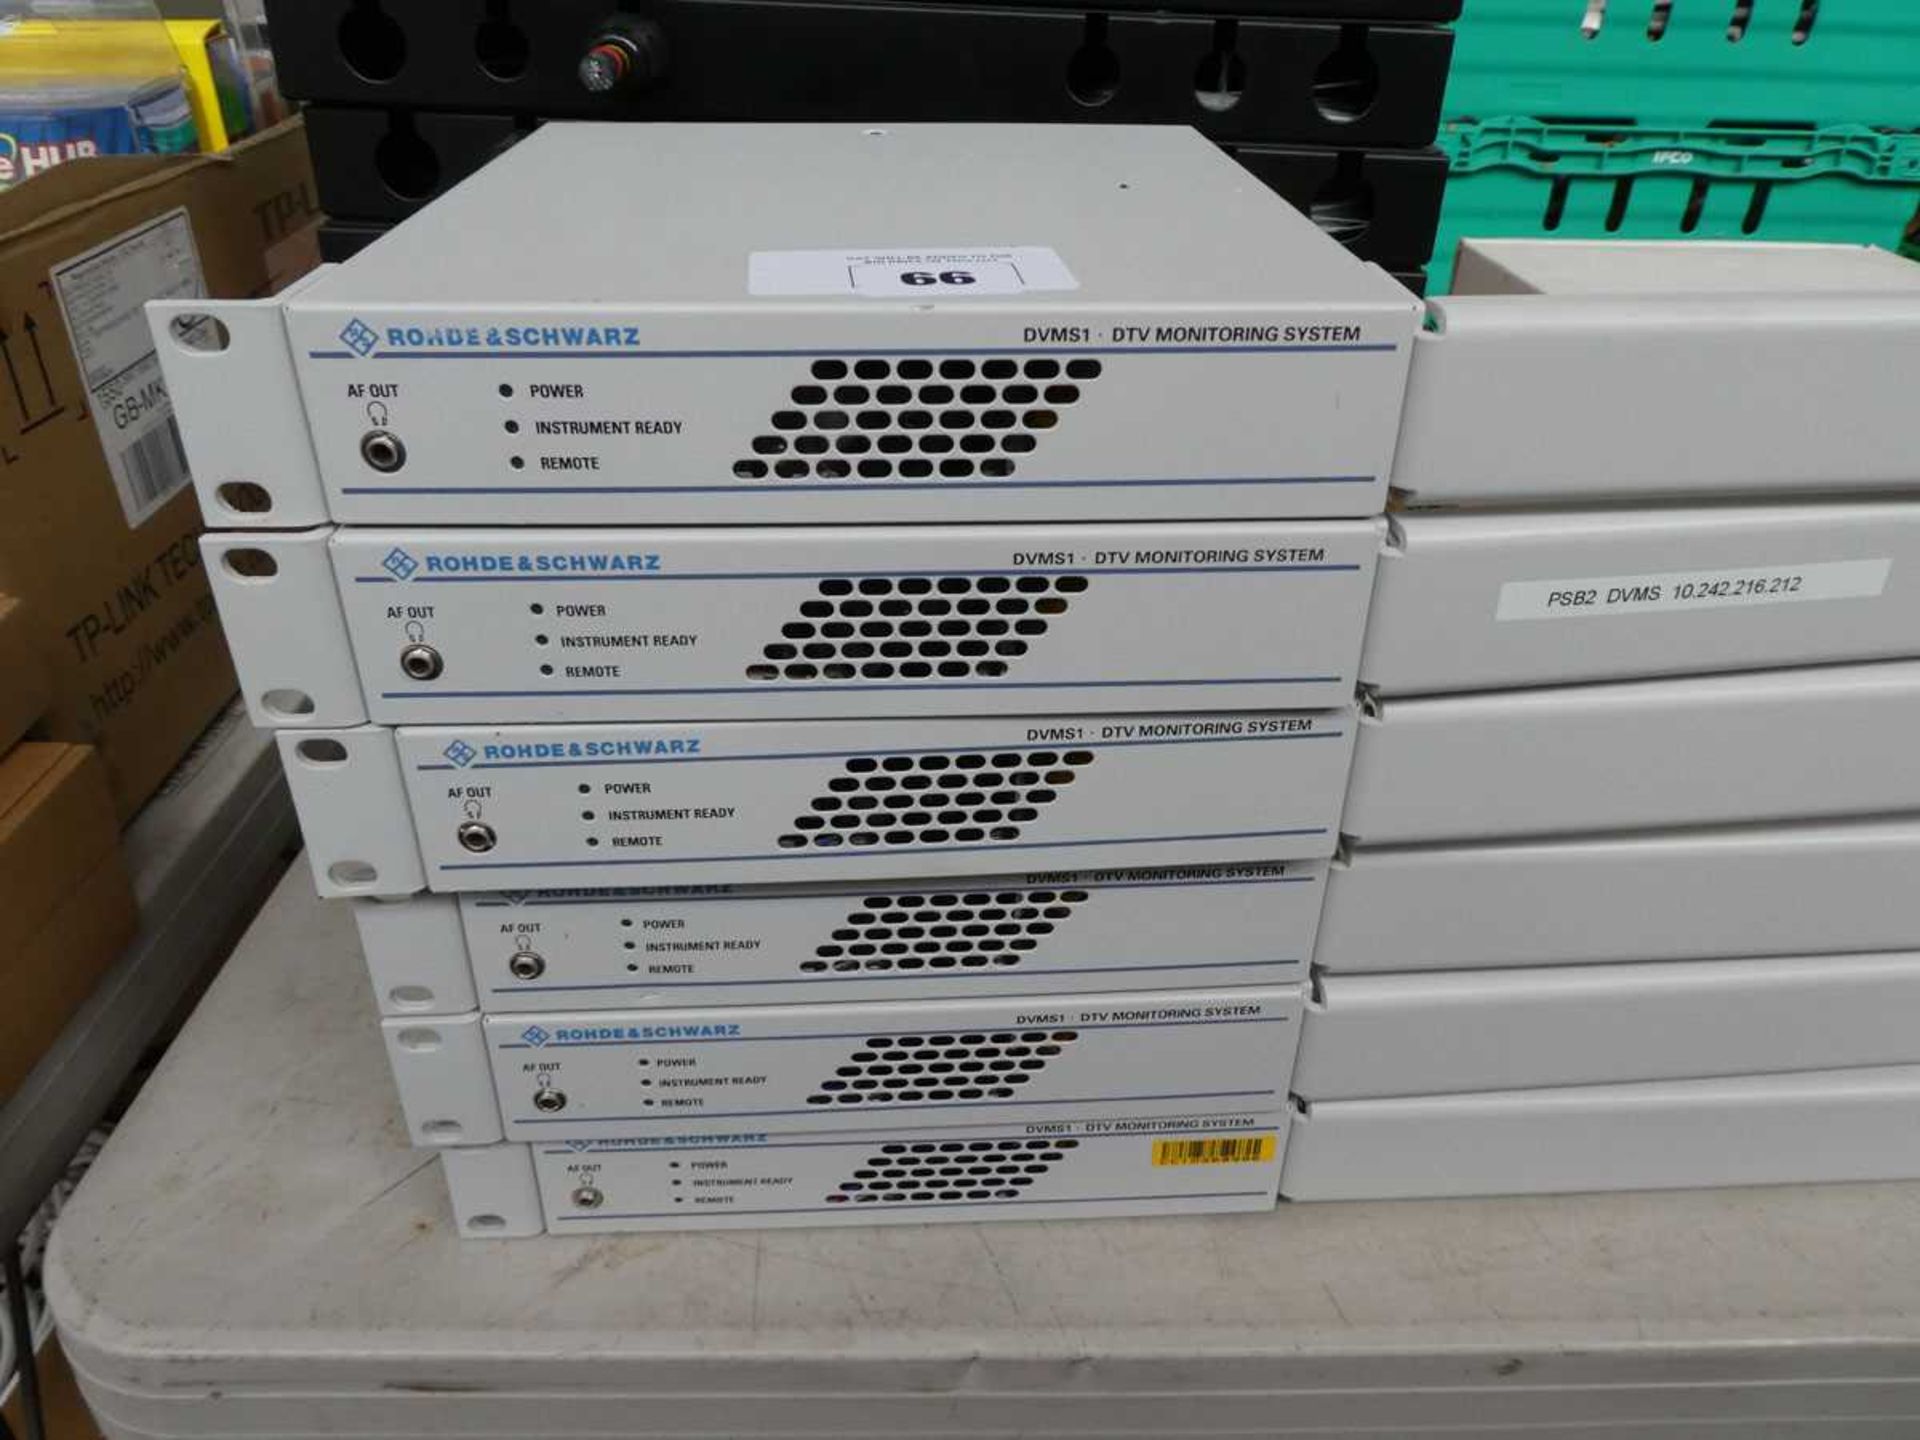 +VAT 6 Rohde & Schwarz DVNS1 DTV monitoring system units for rack mounting with manuals